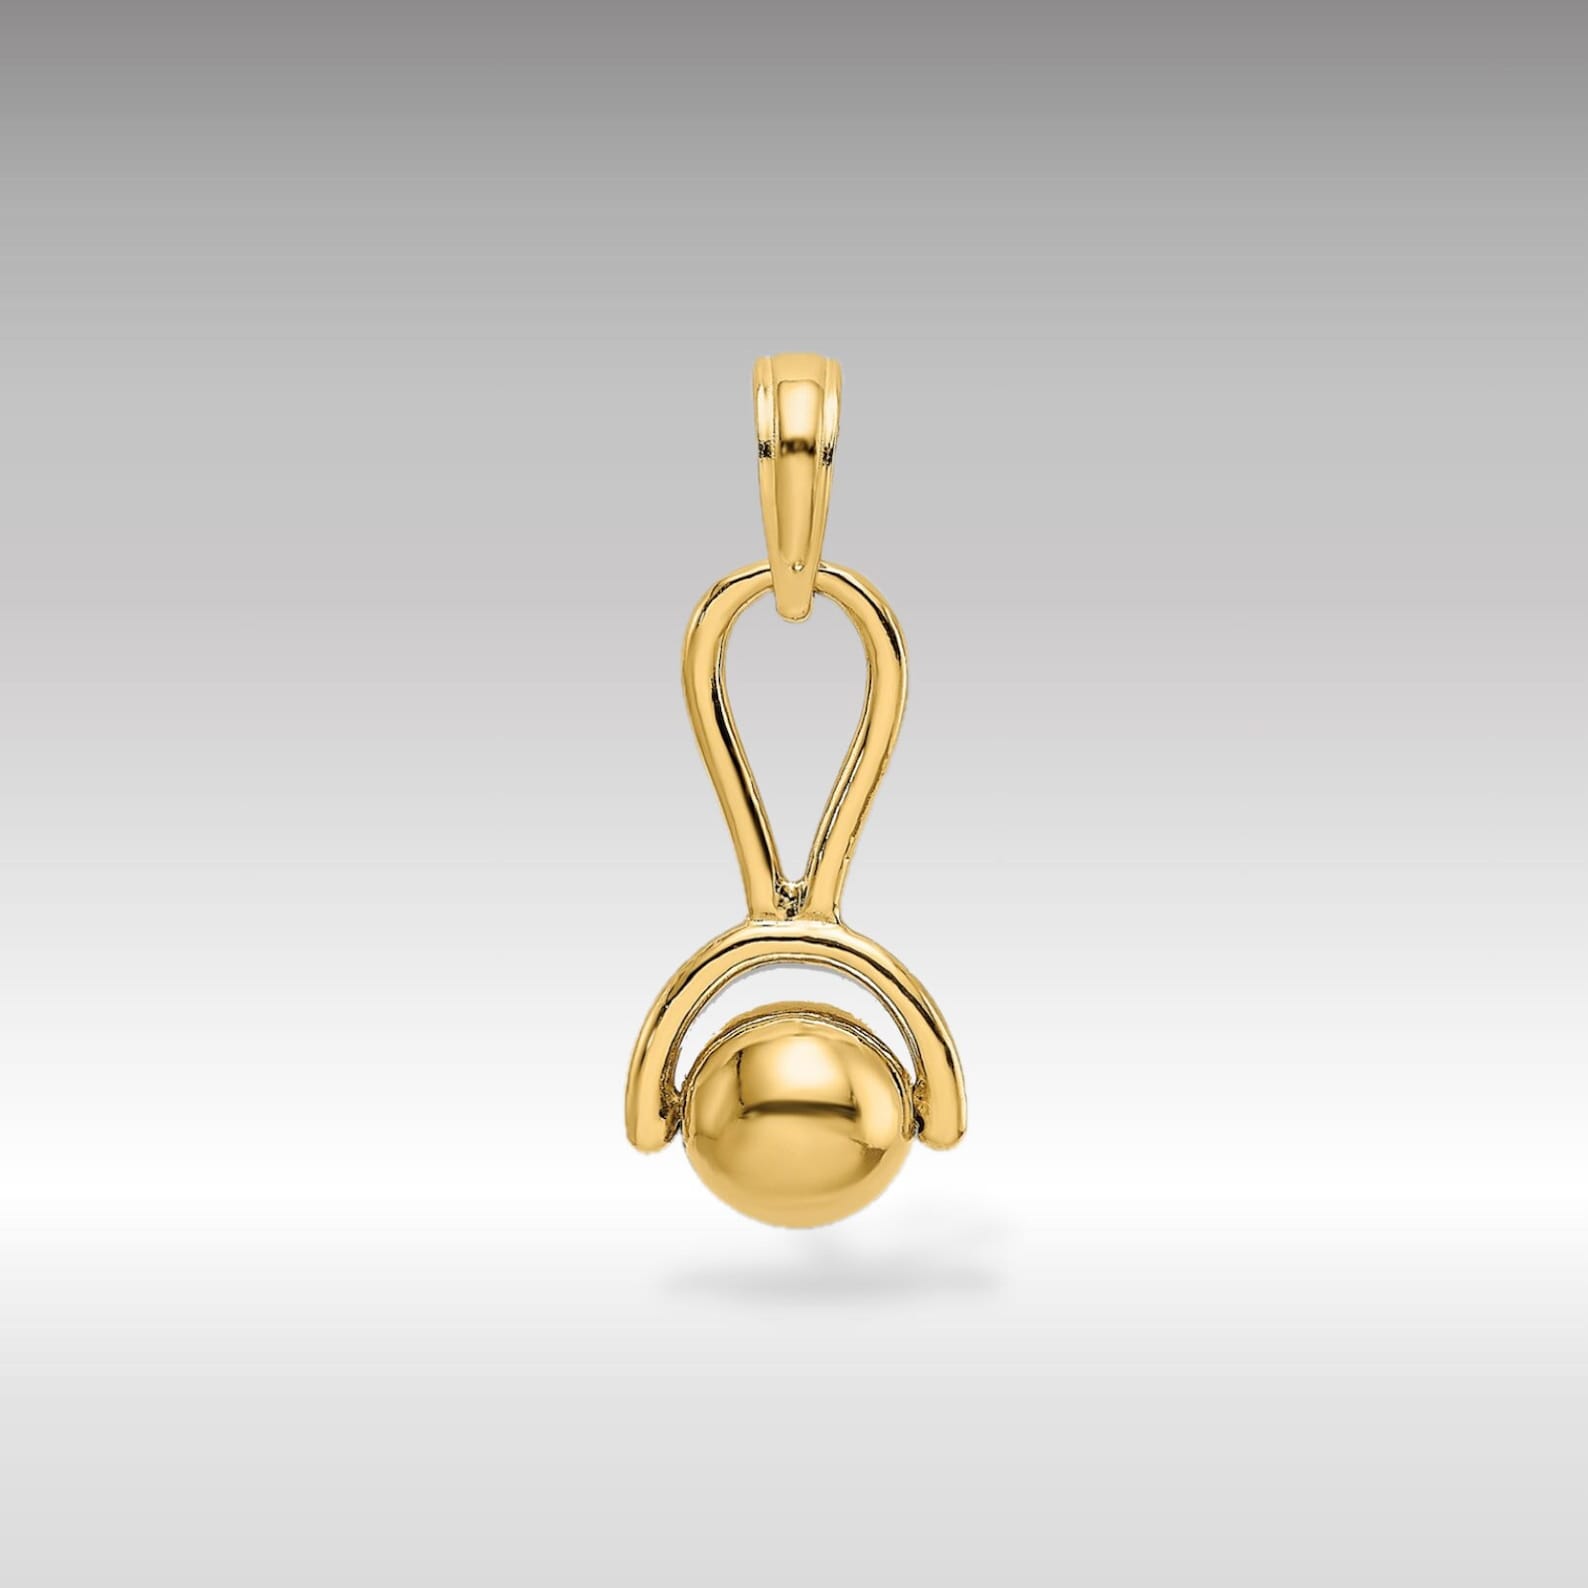 Gold 3D Baby Rattle Pendant with Moveable Ball - Charlie & Co. Jewelry